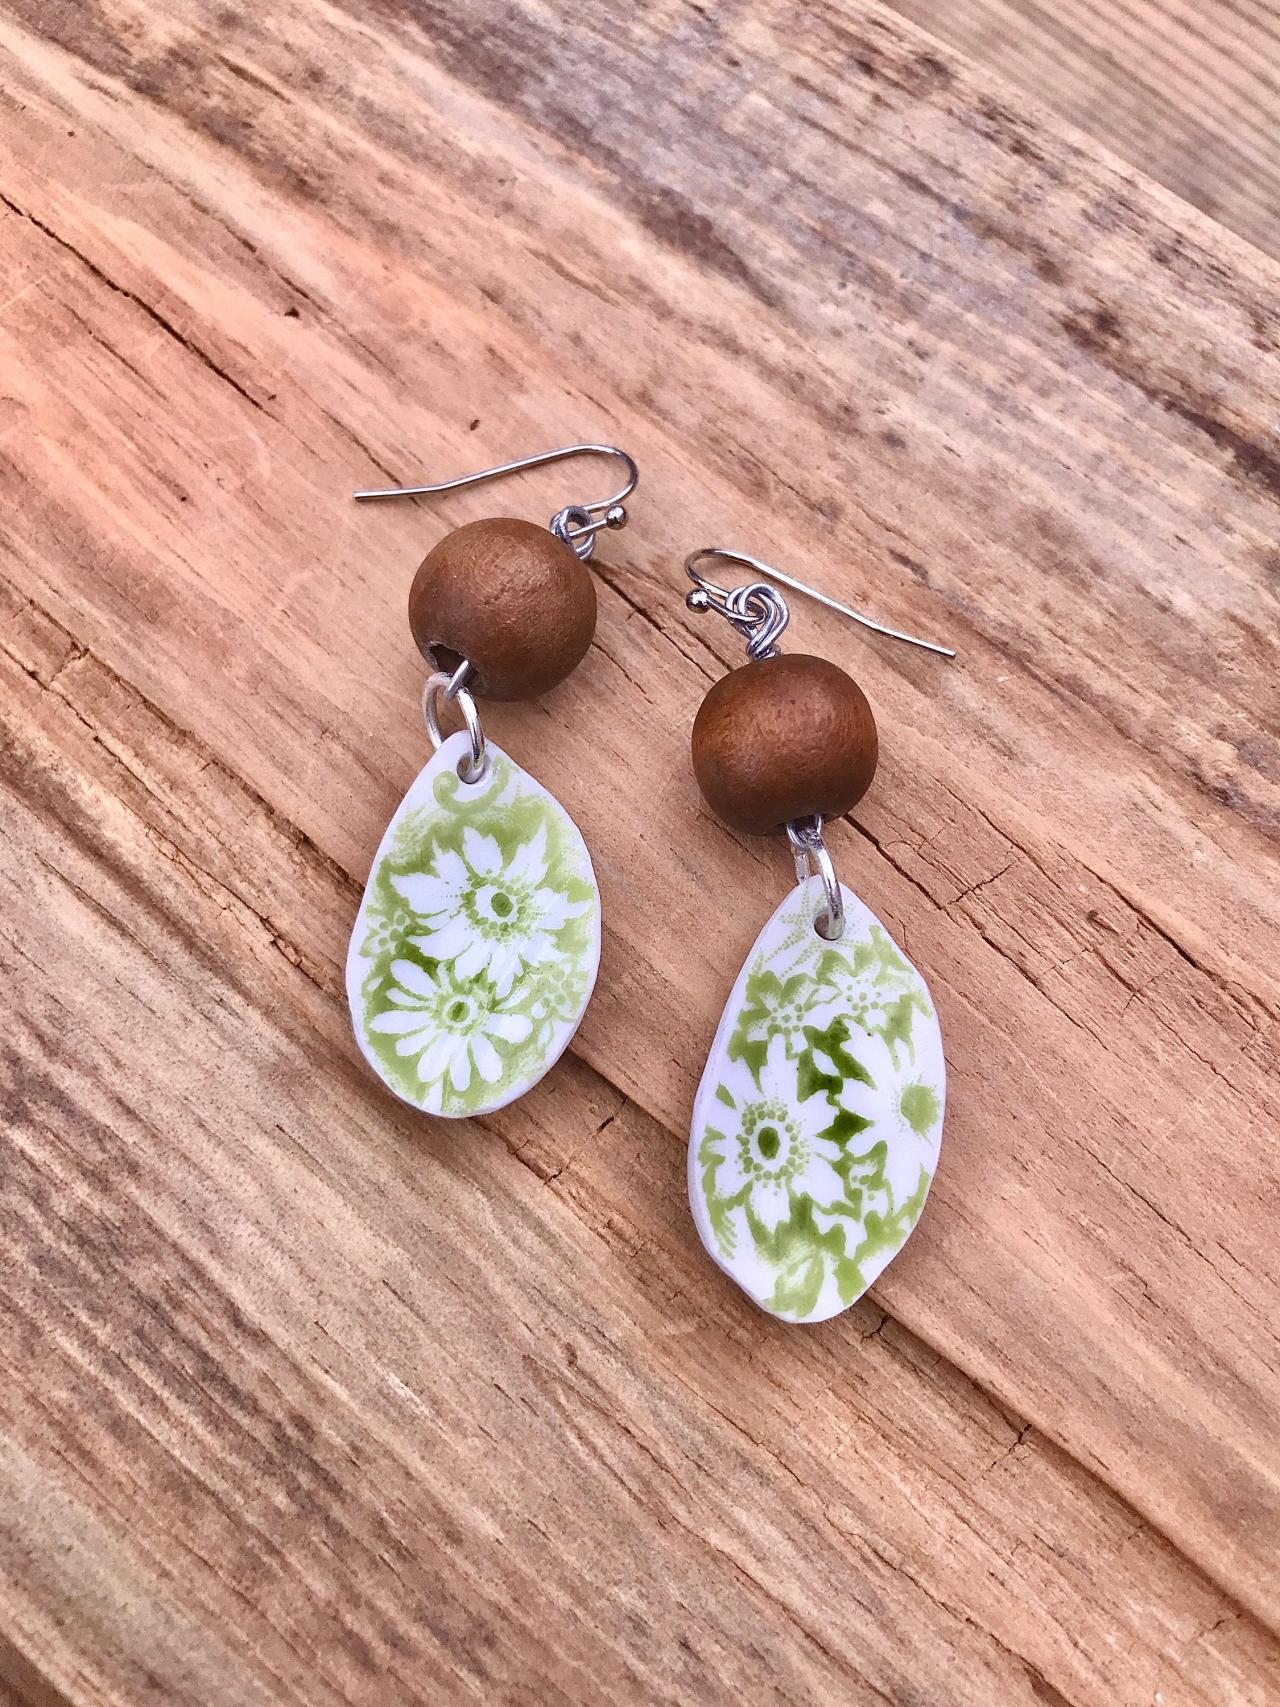 Gorgeous green floral & wood bead vintage recycled China earrings with sterling silver wires.